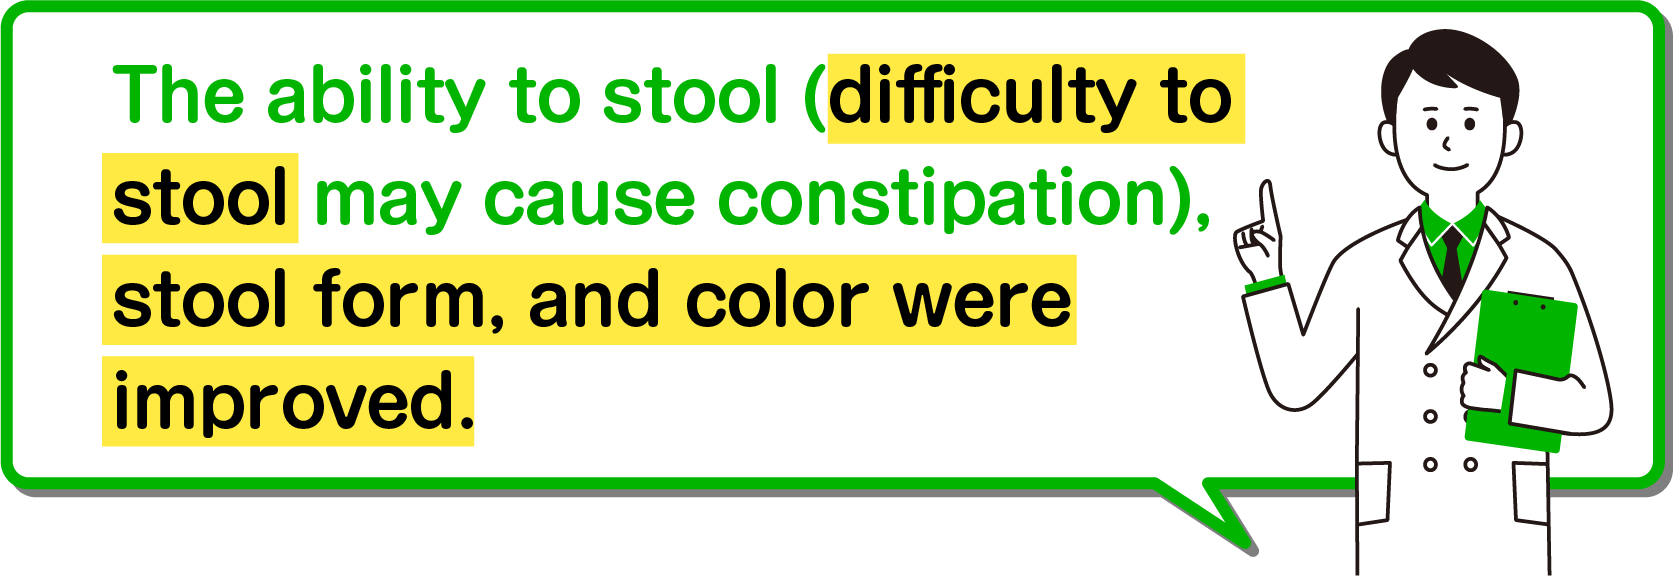 The ability to stool (difficulty to stool may cause constipation), stool form, and color were improved.